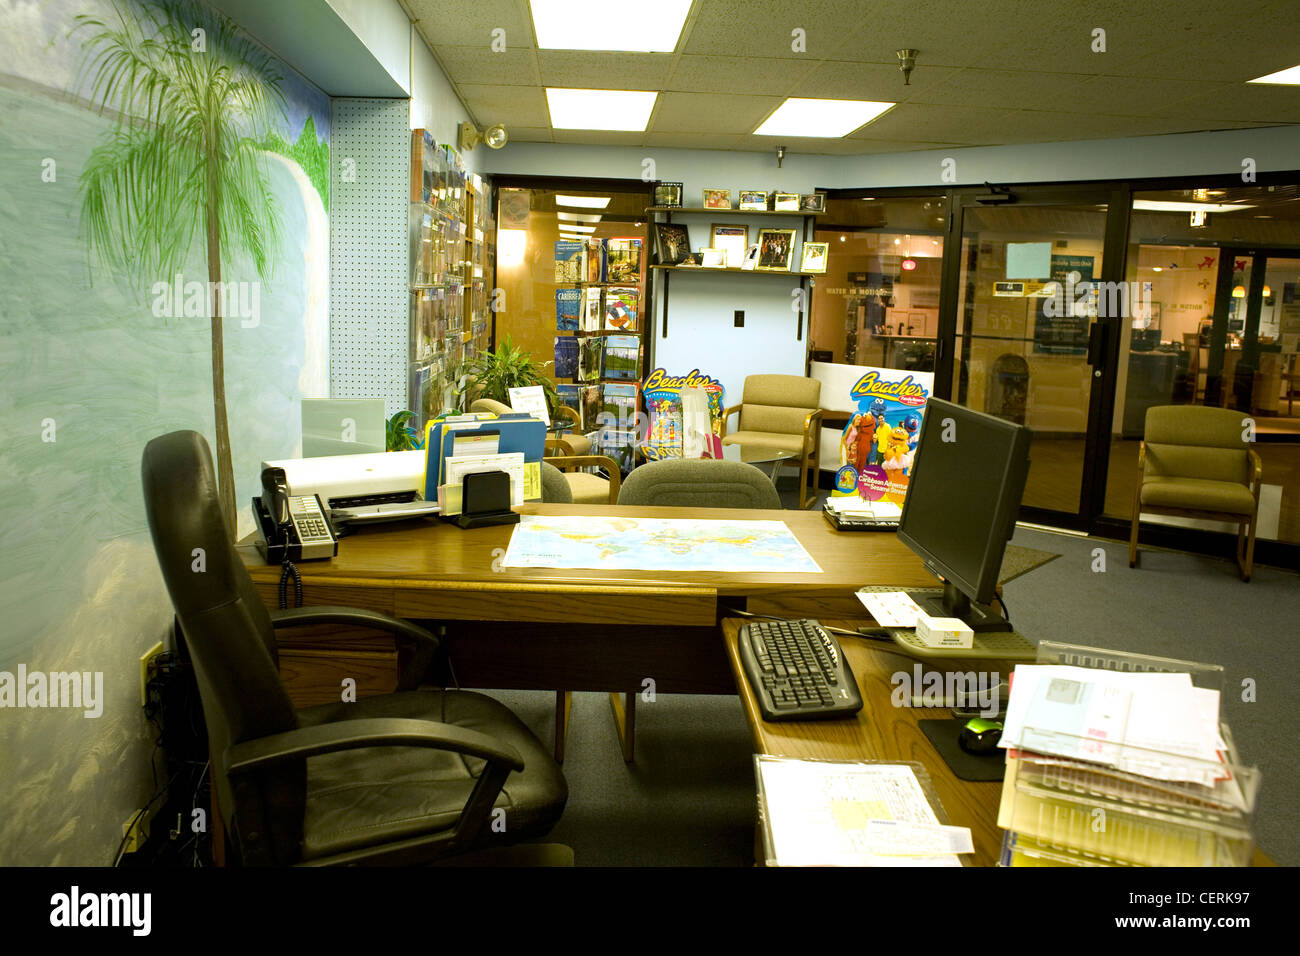 Interior of a travel agency office in Pittsfield, MA has hand-painted tropical scene on wall. Stock Photo